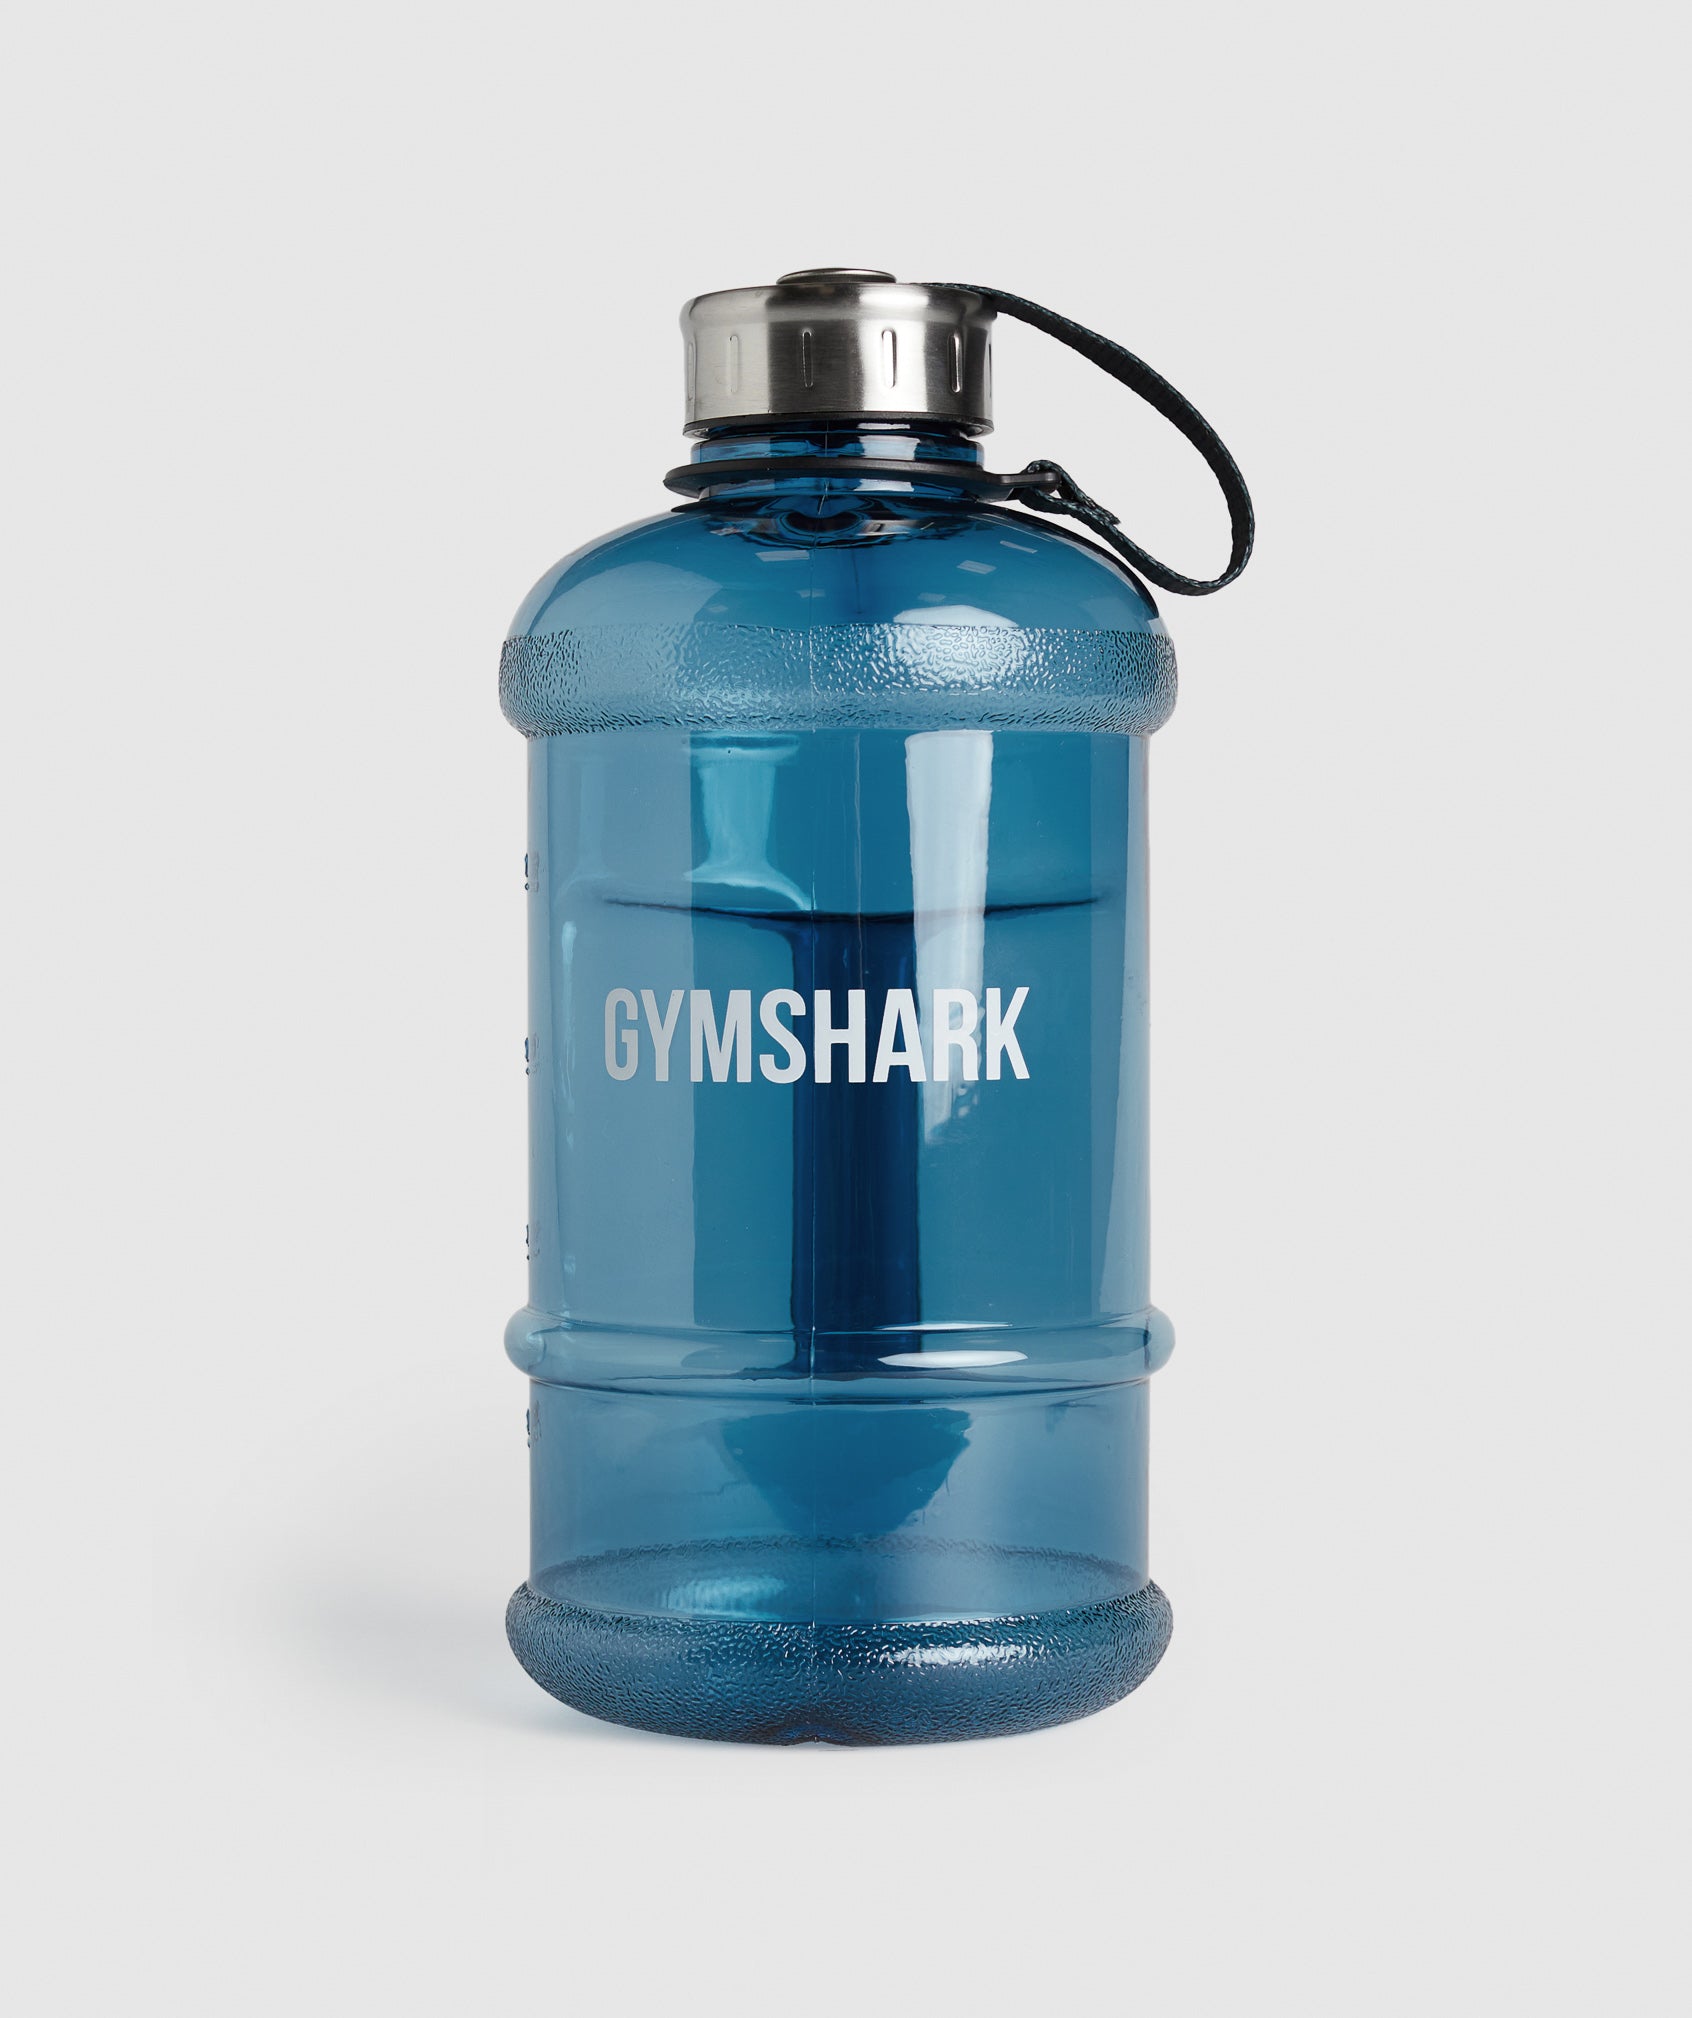 1.5L Water Bottle in Retro Blue is out of stock